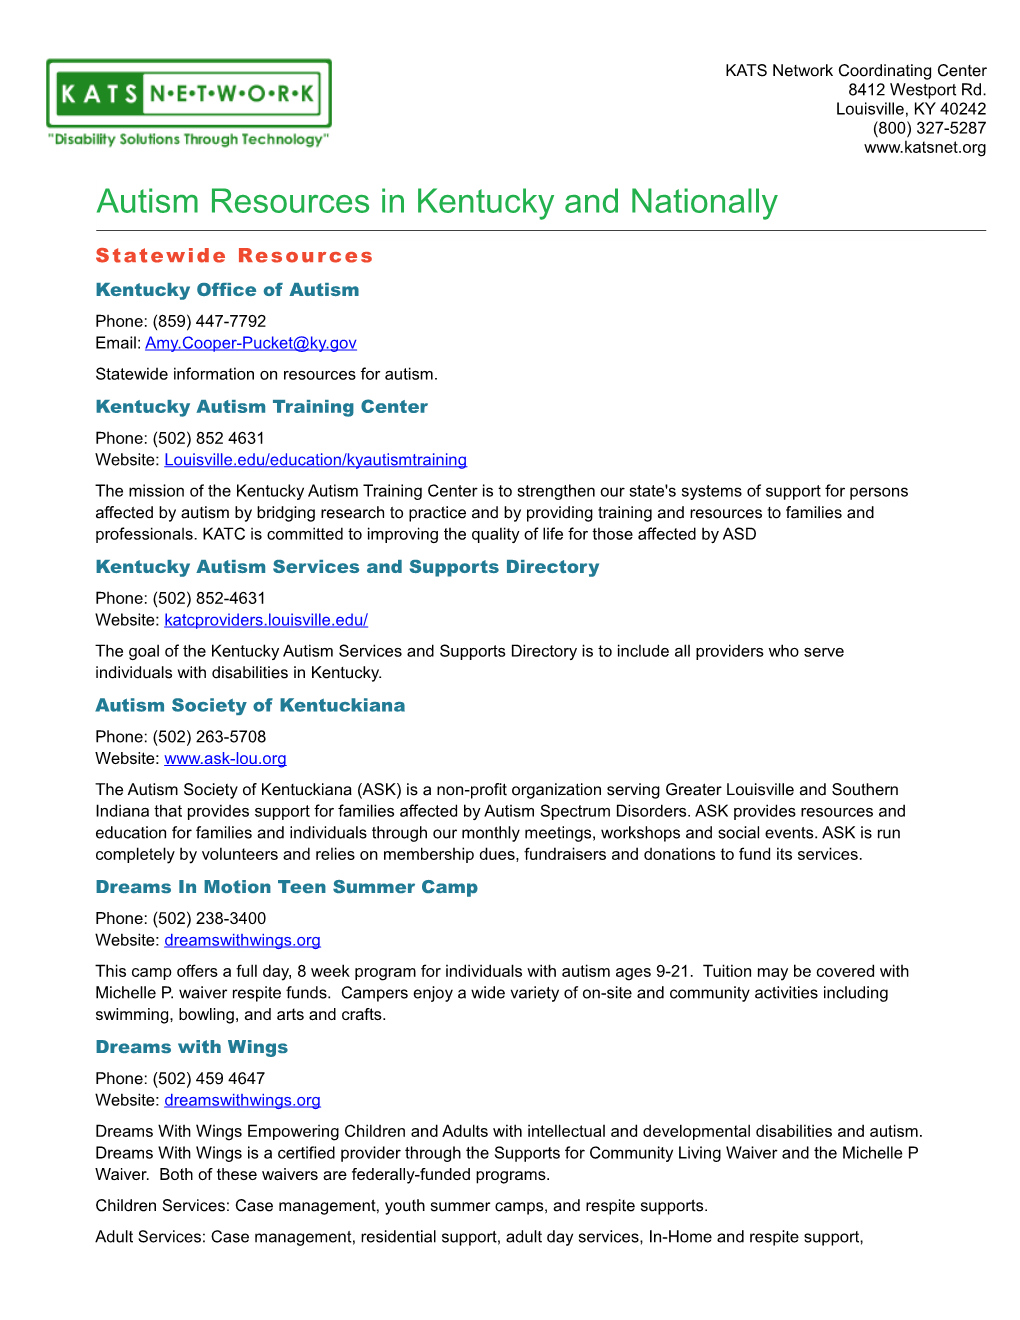 Autism Resources in Kentucky and Nationally